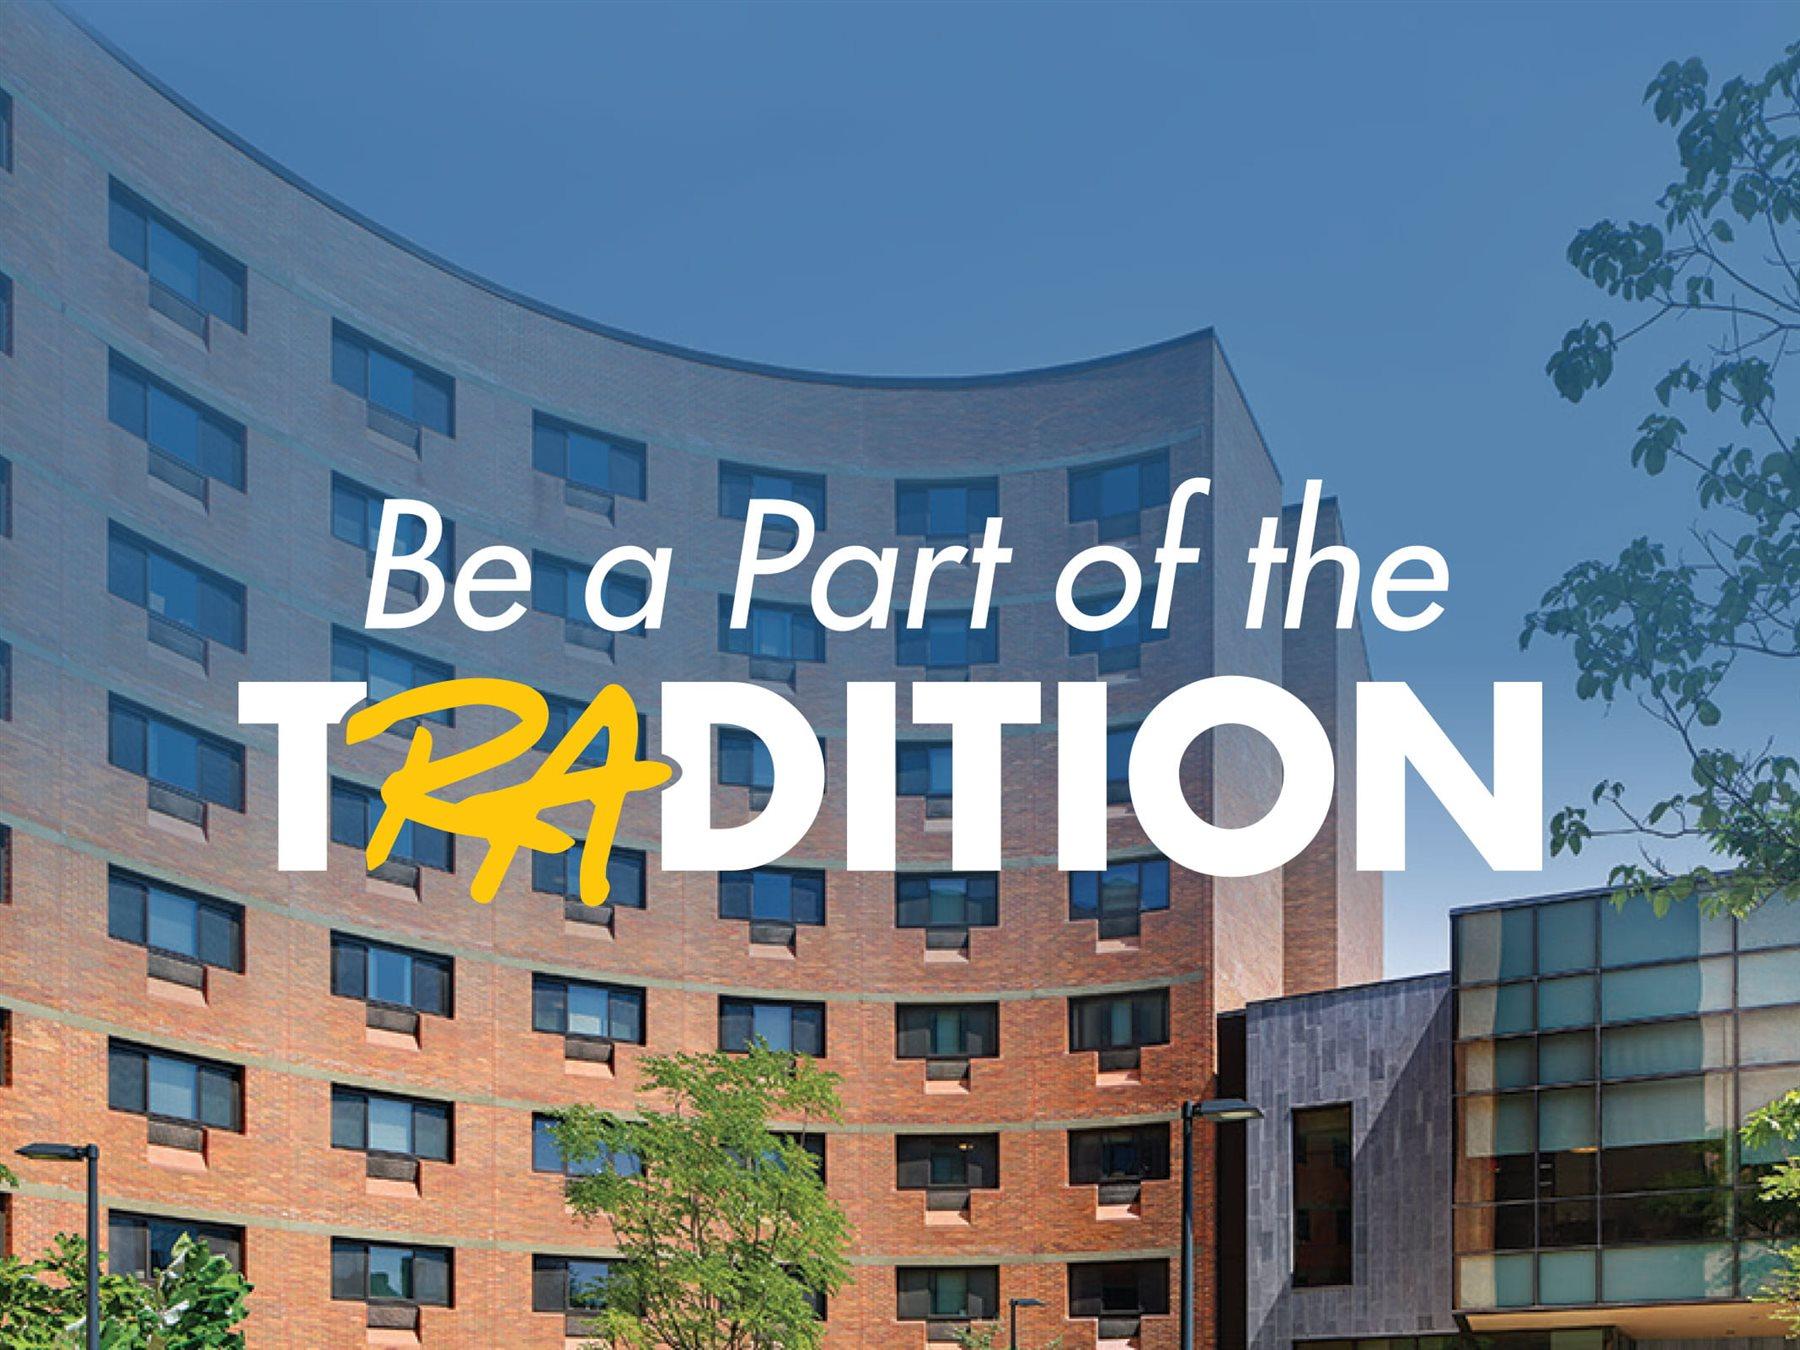 Resident Assistants – Be a part of the tradition